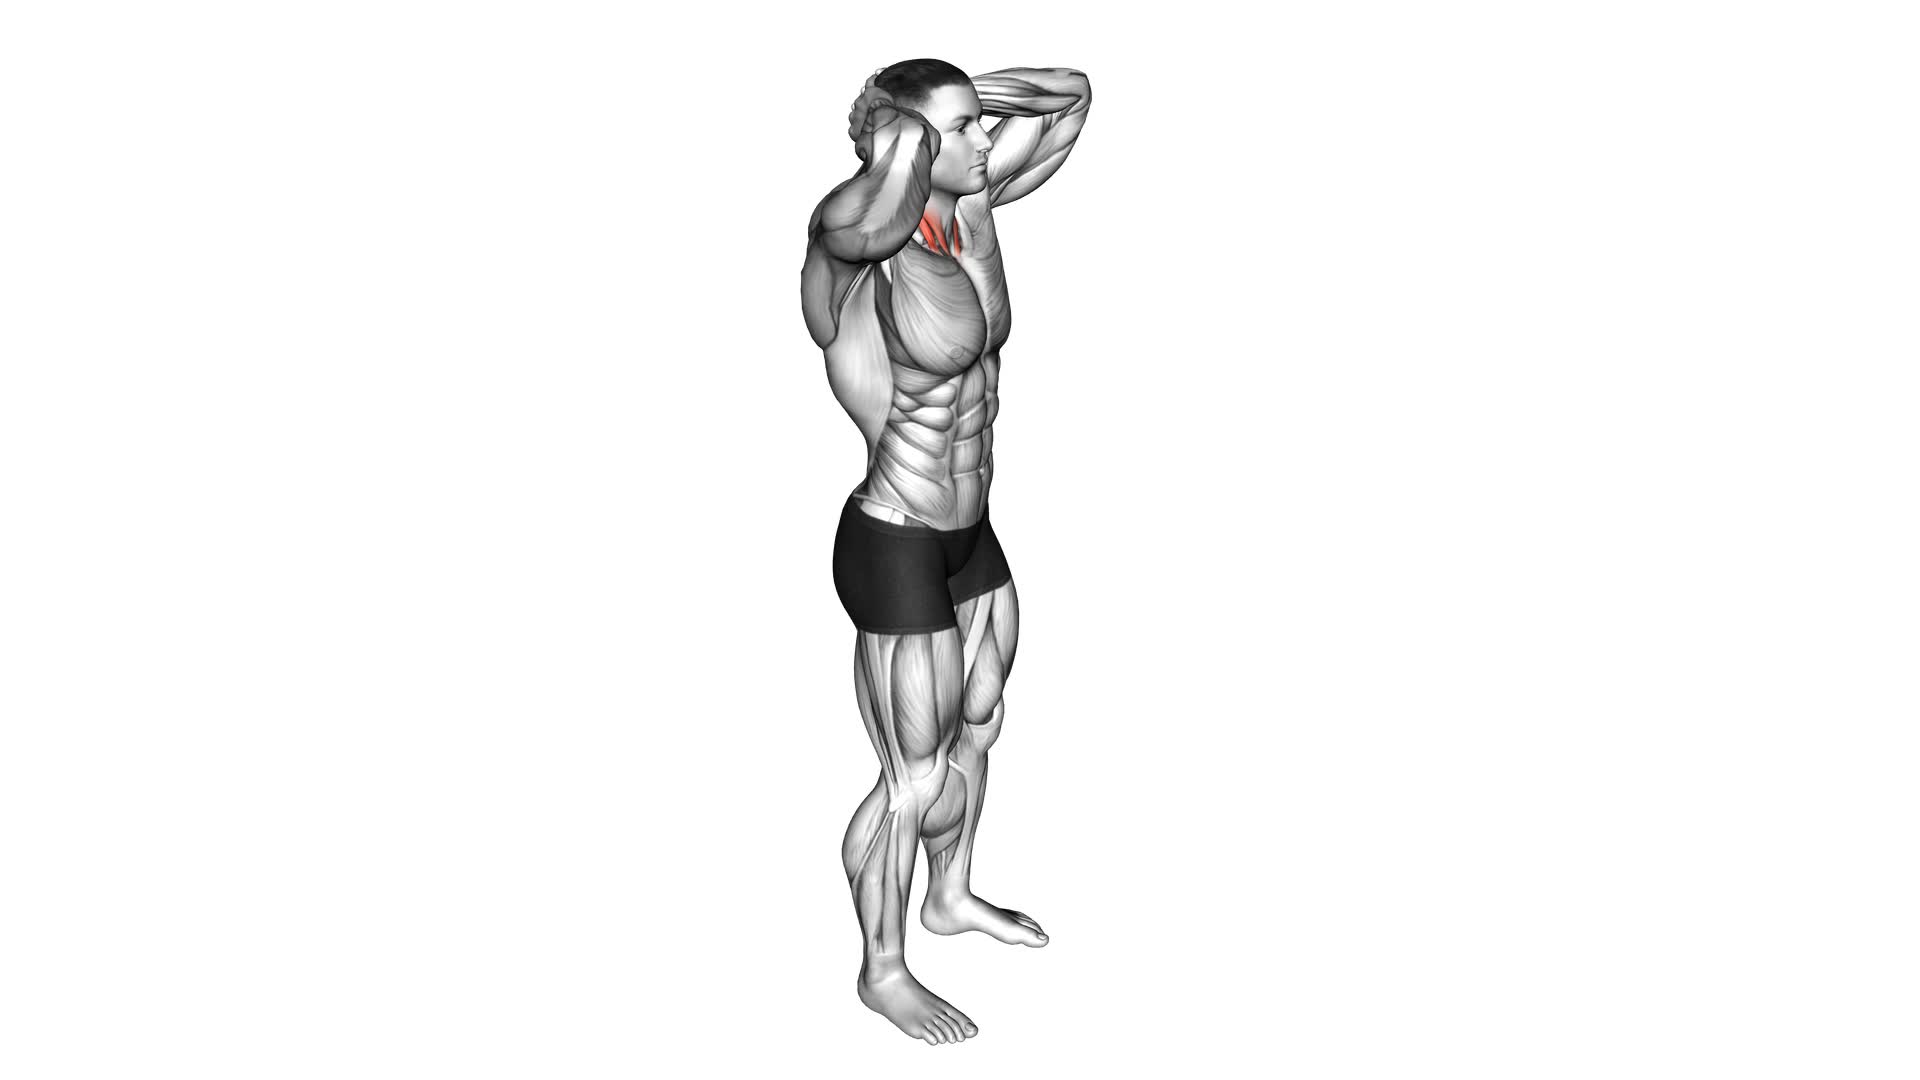 Posterior Neck Isometric - Video Exercise Guide & Tips